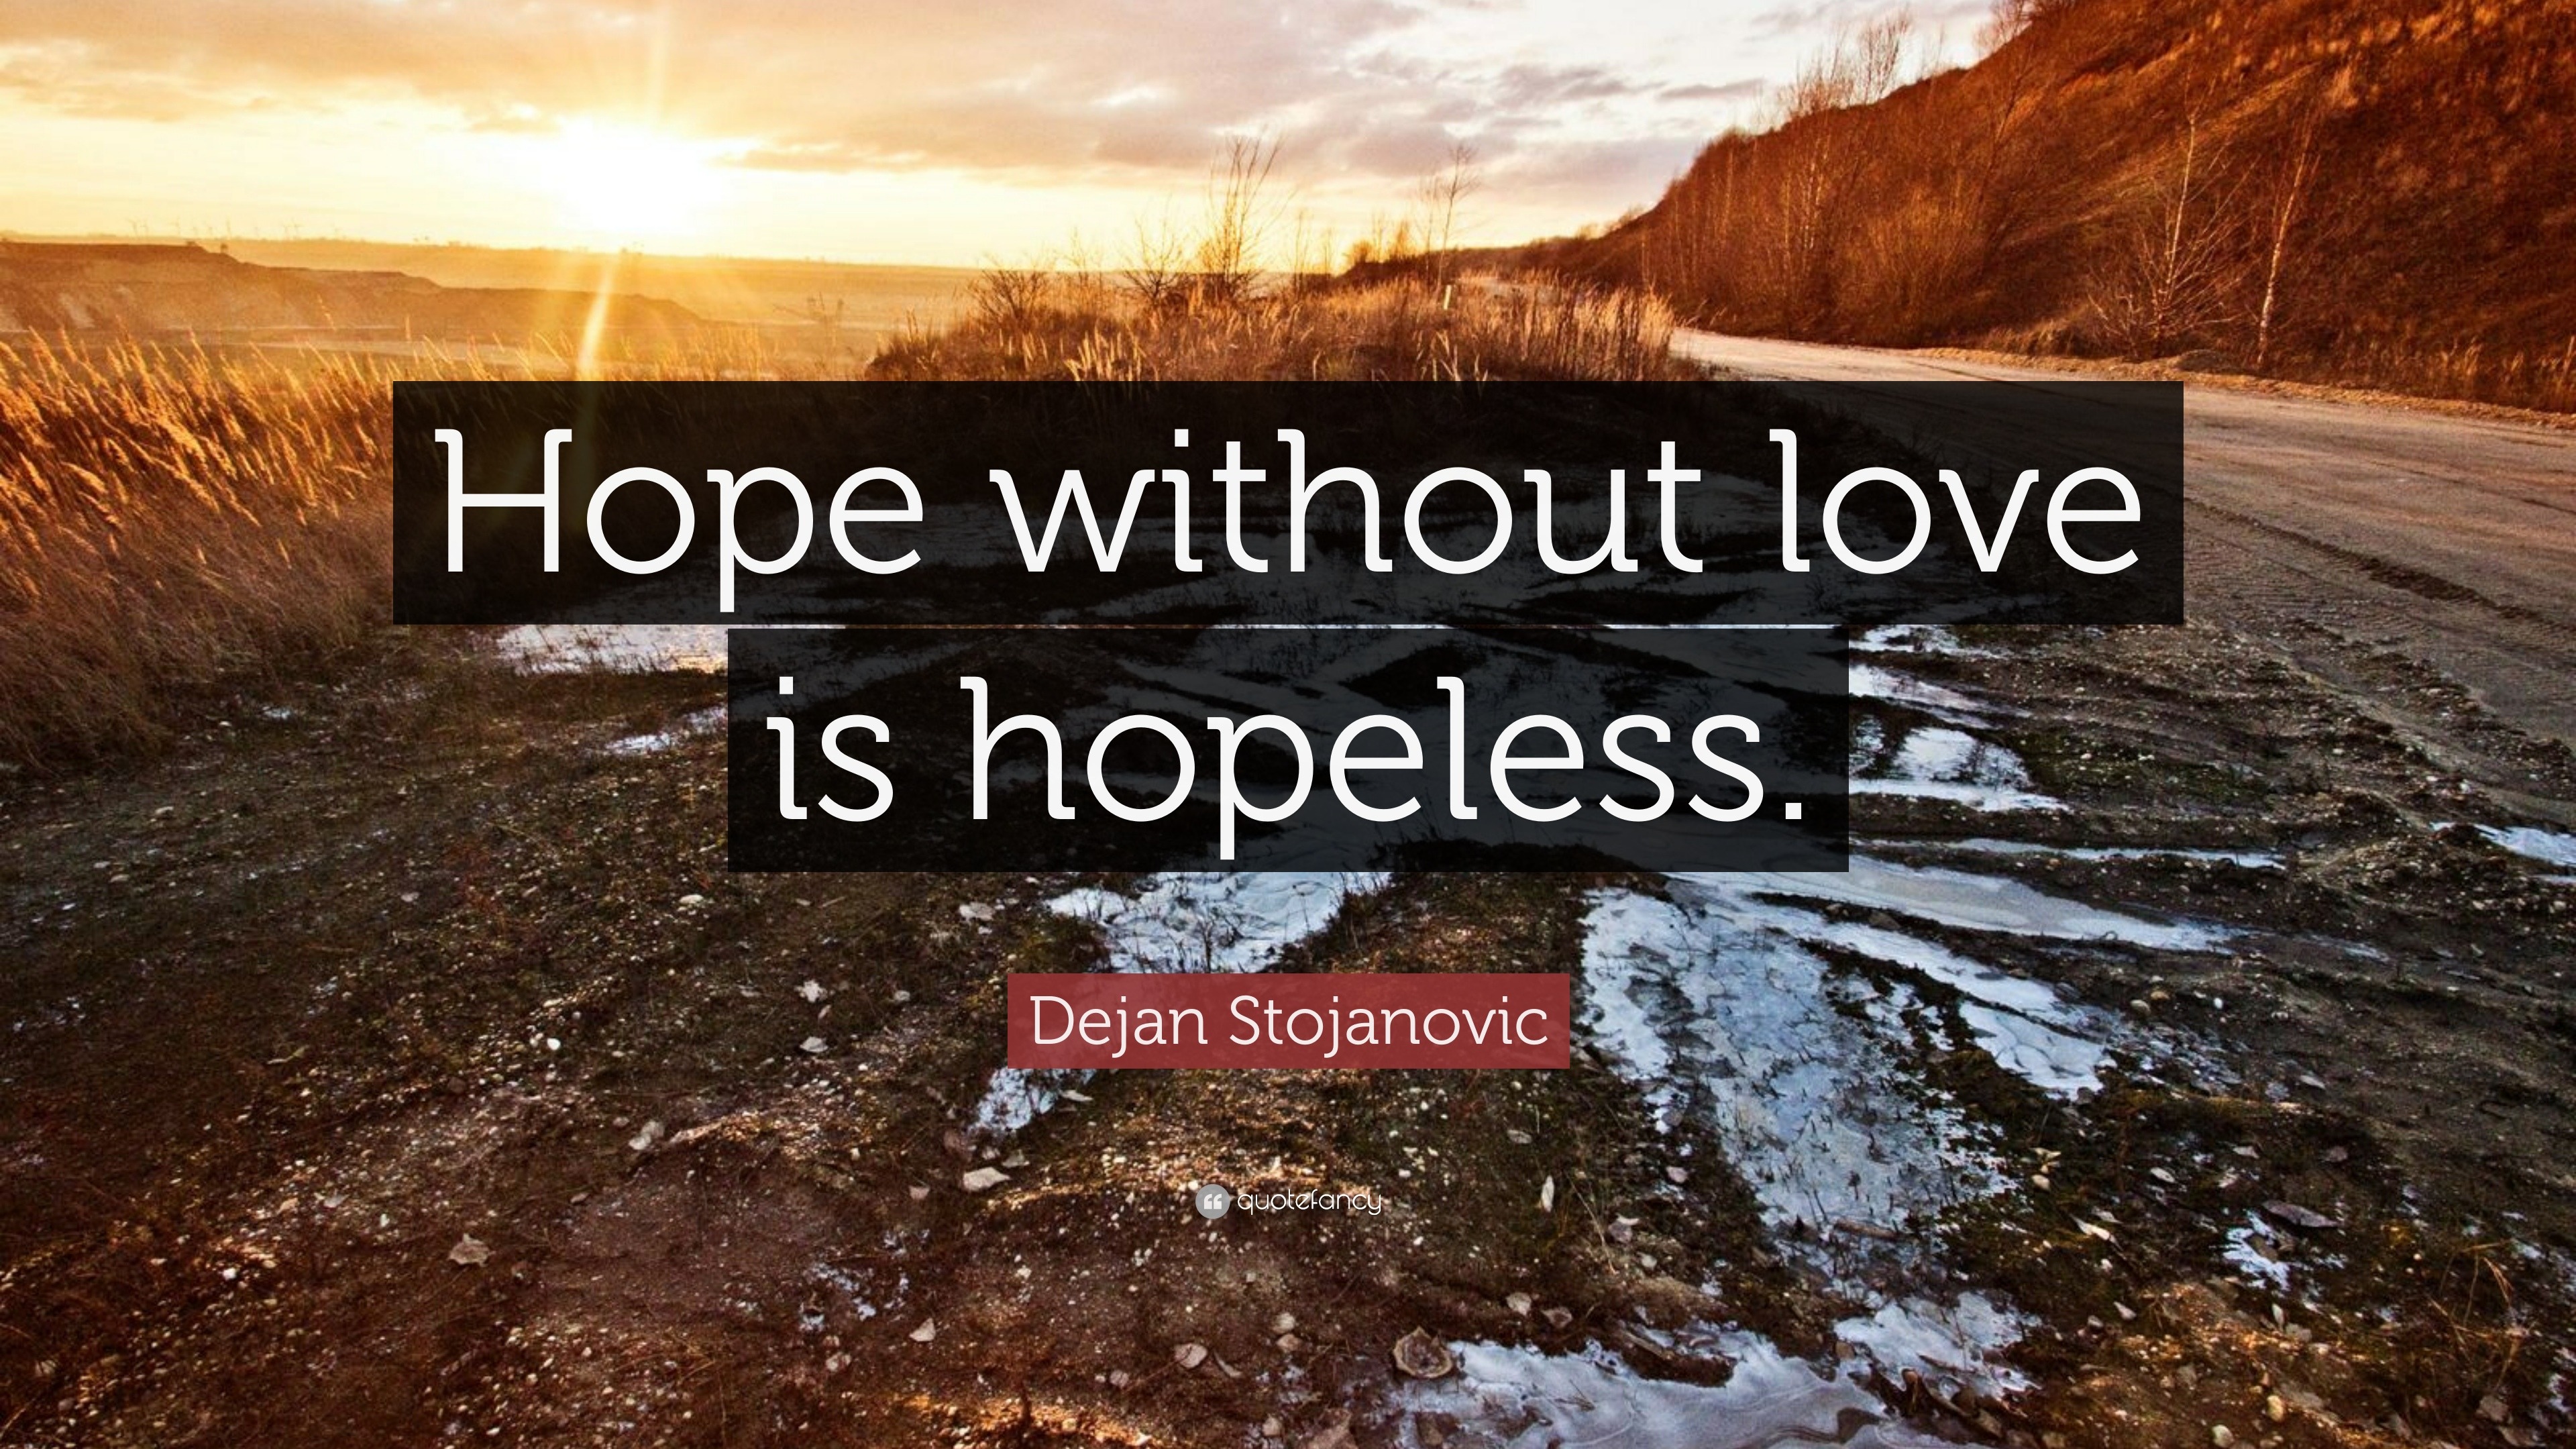 Dejan Stojanovic Quote: “Hope without love is hopeless.”